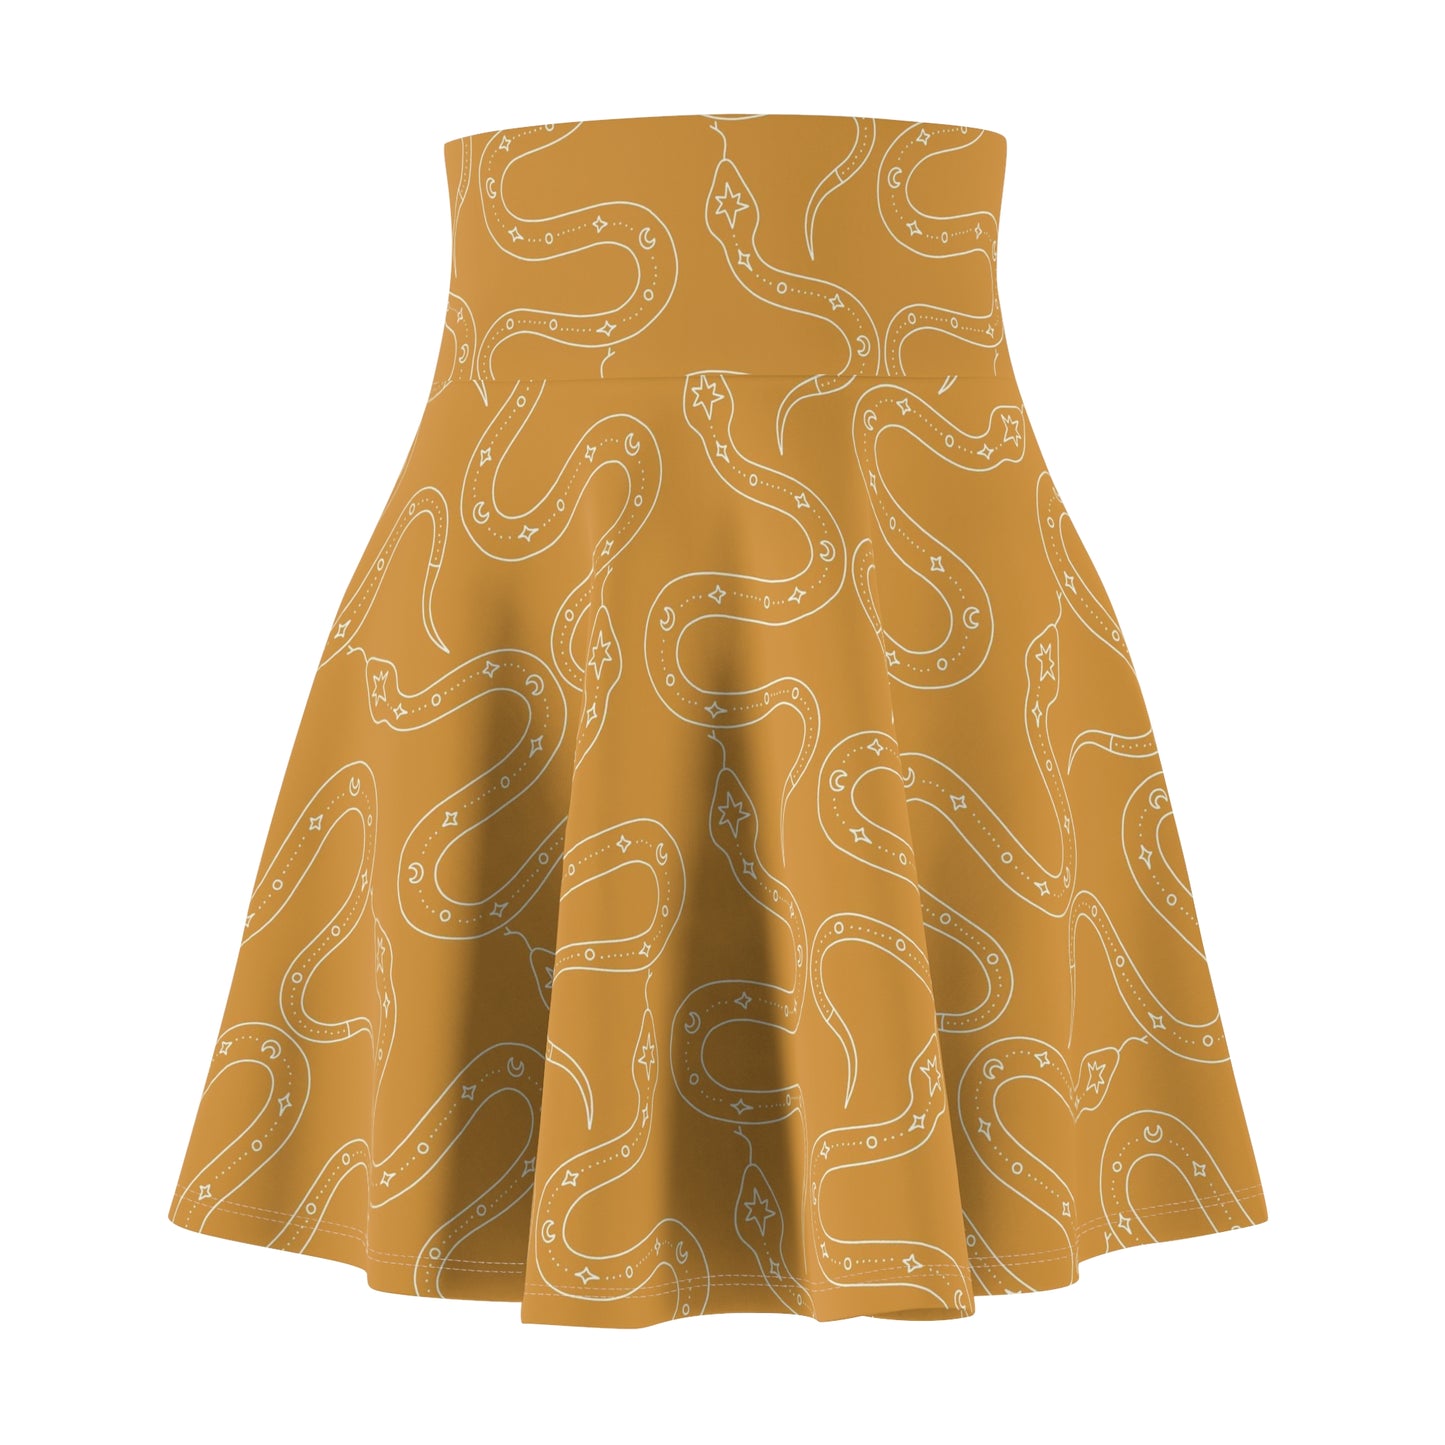 Magical Snakes on Yellow | Witchy Skirt | Magical Skirt | Yellow & Orange